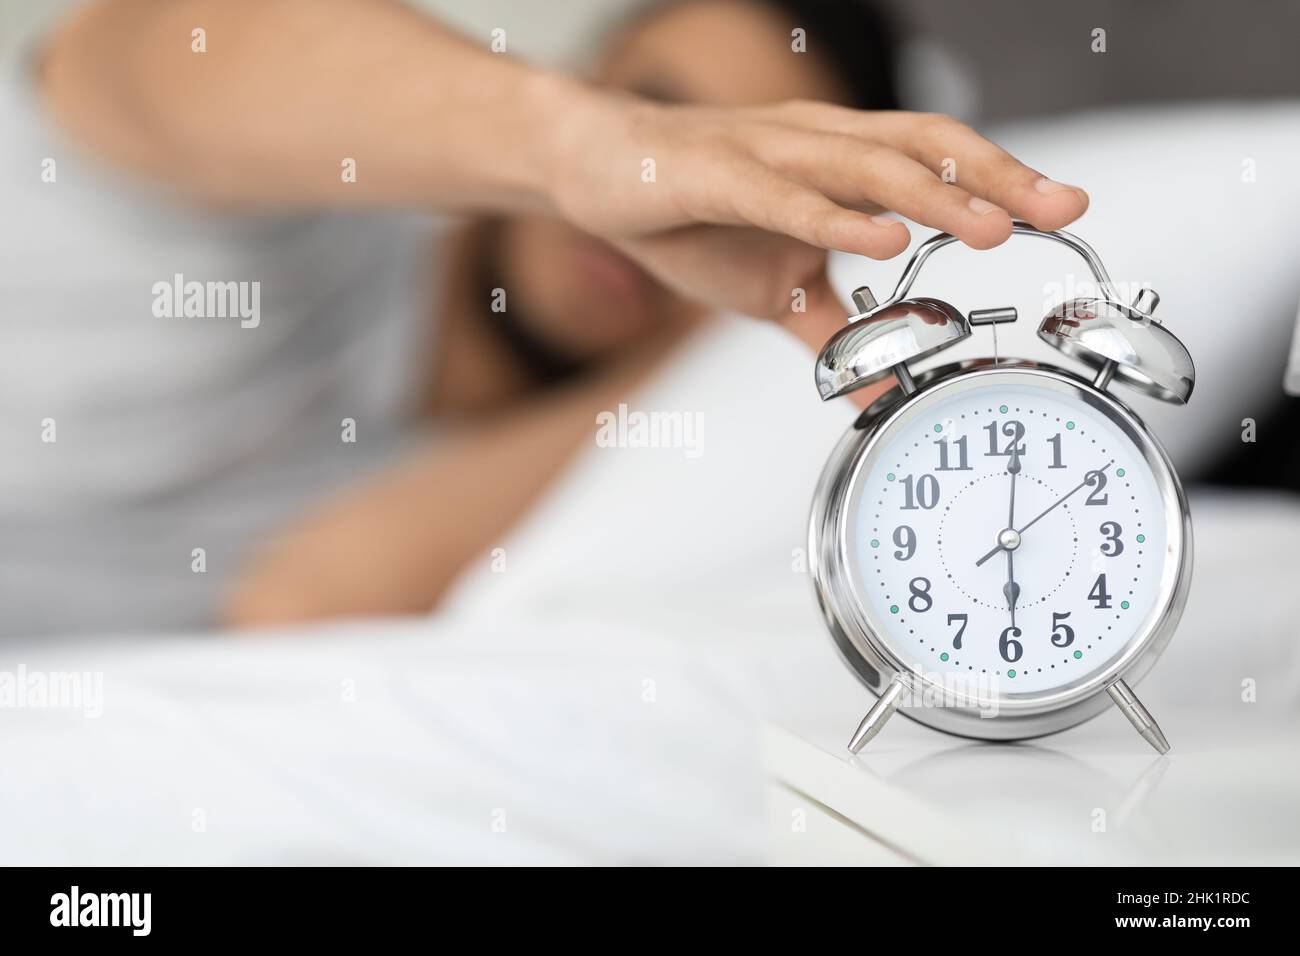 Time To Wake Up. Man Reaching Alarm Clock On Bedside Table, Closeup Stock Photo